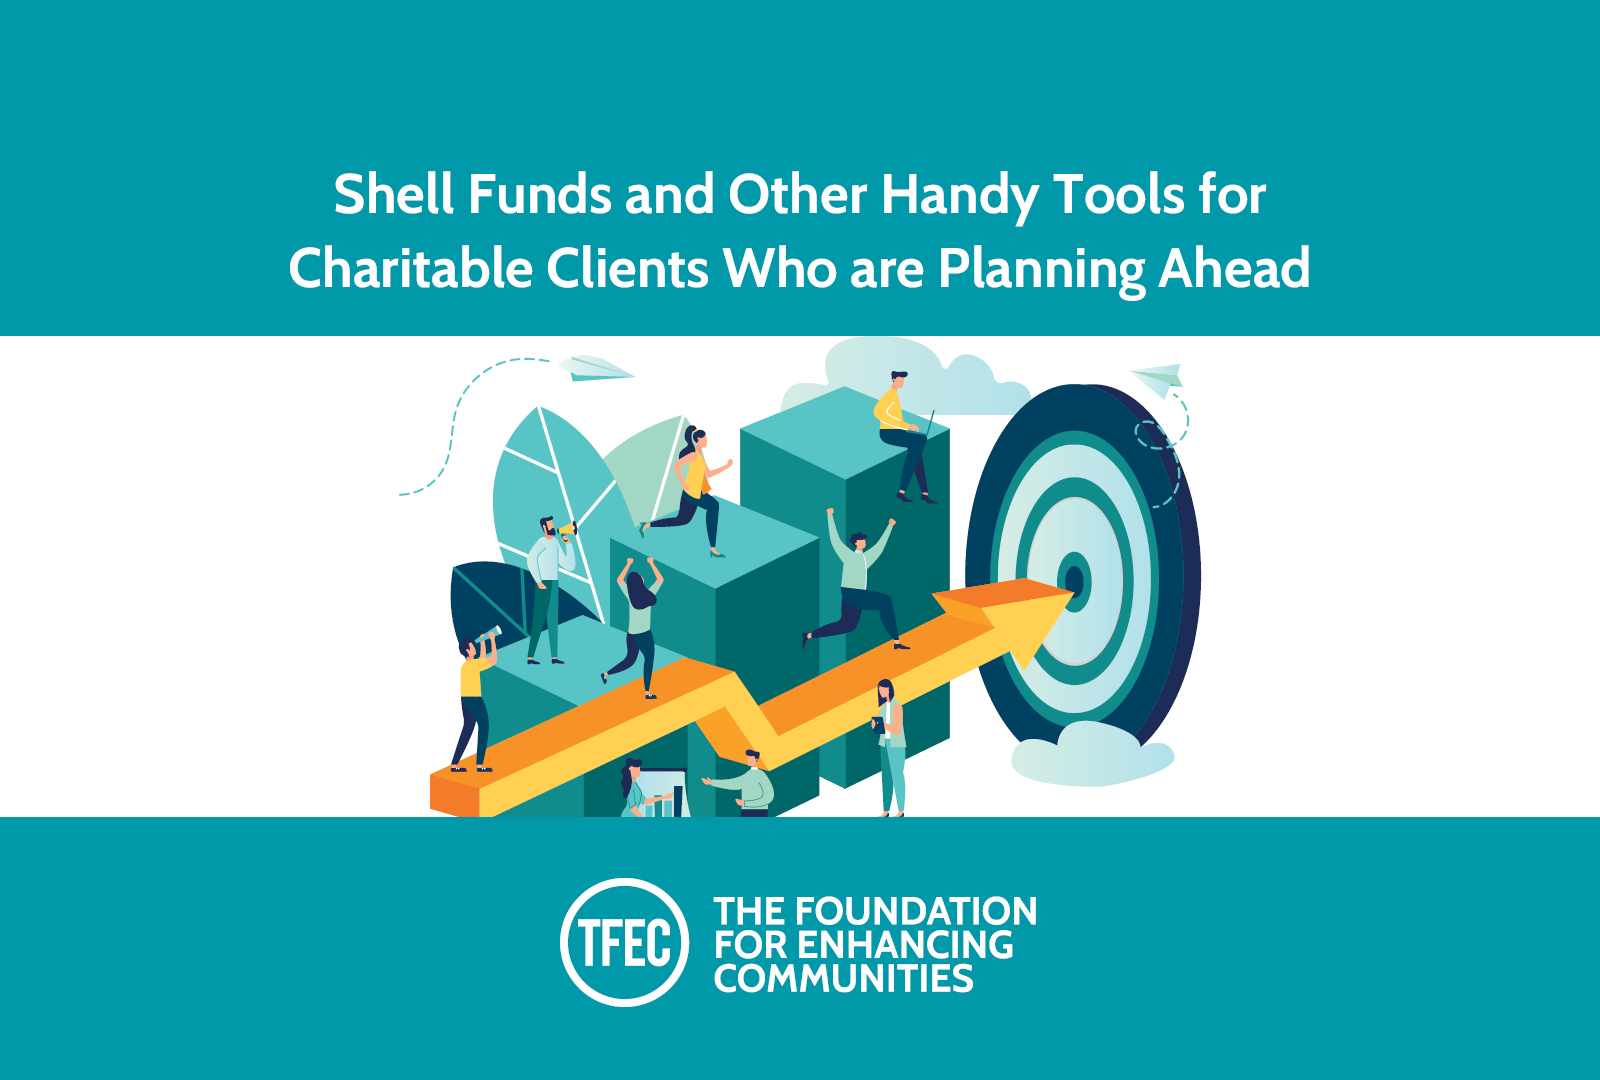 “Shell Funds” and Other Handy Tools for Charitable Clients Who are Planning Ahead